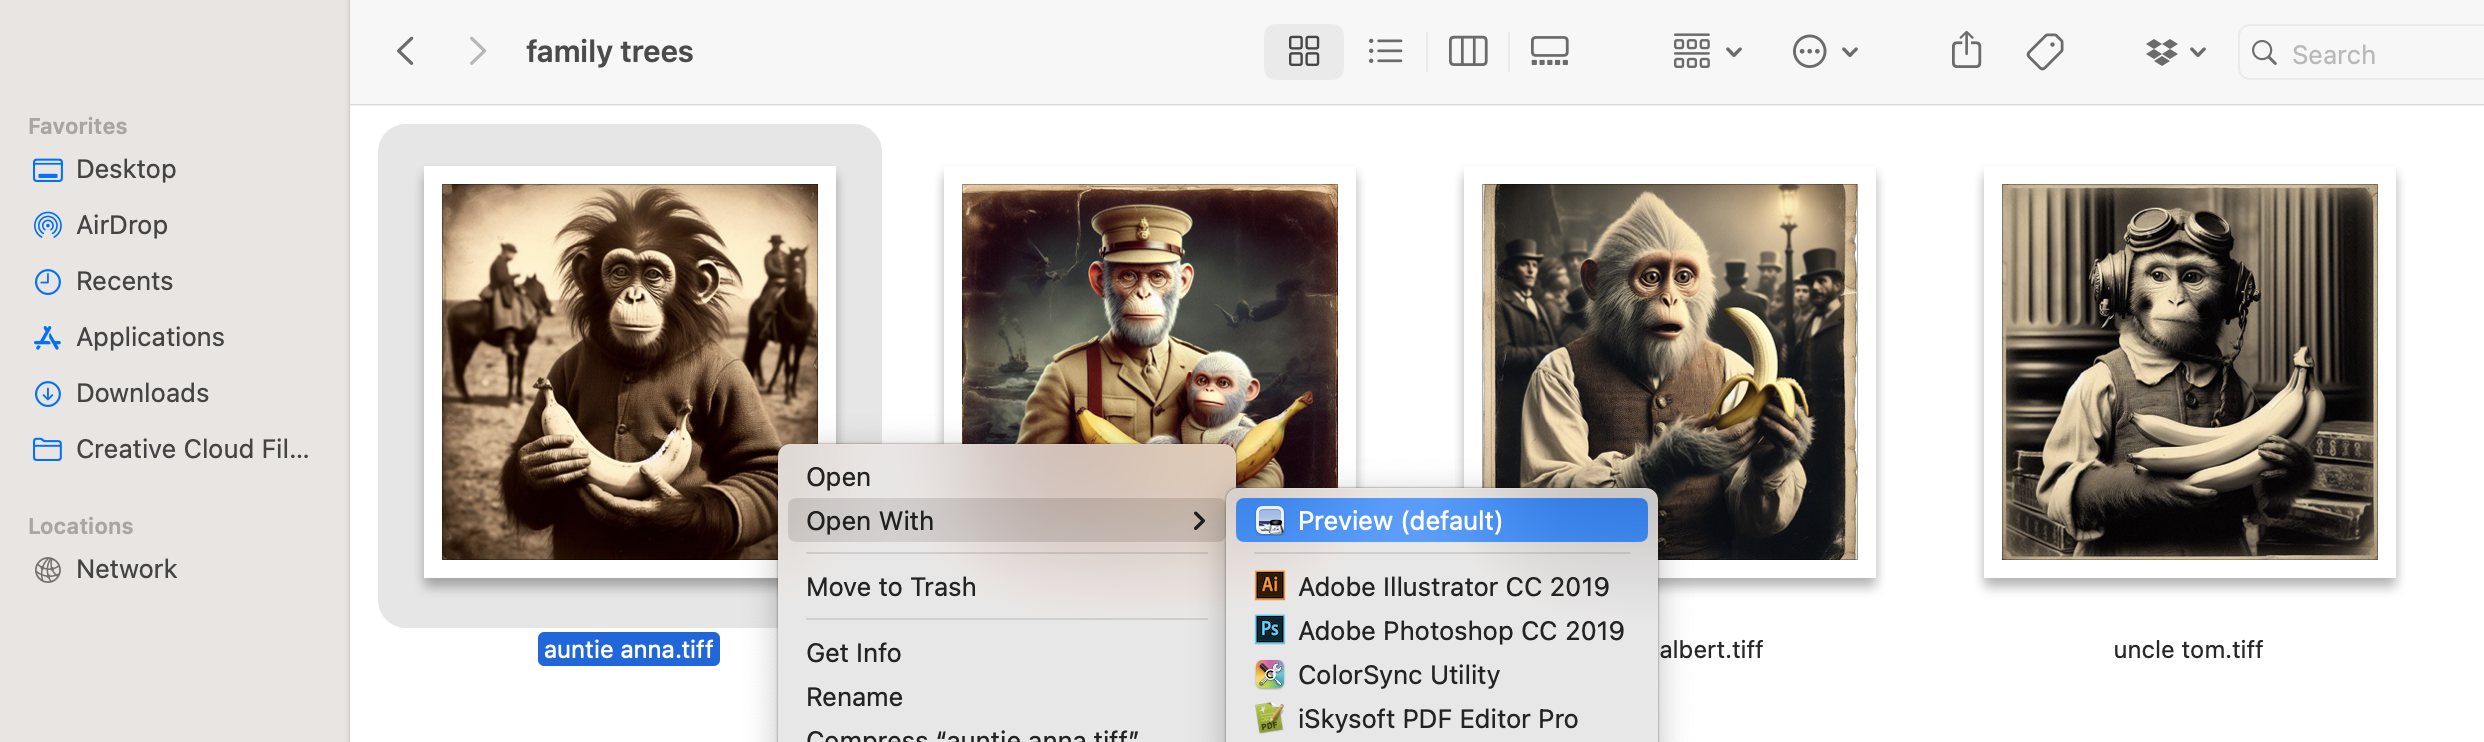 How To View Old Photo Files on Mac: Step 2